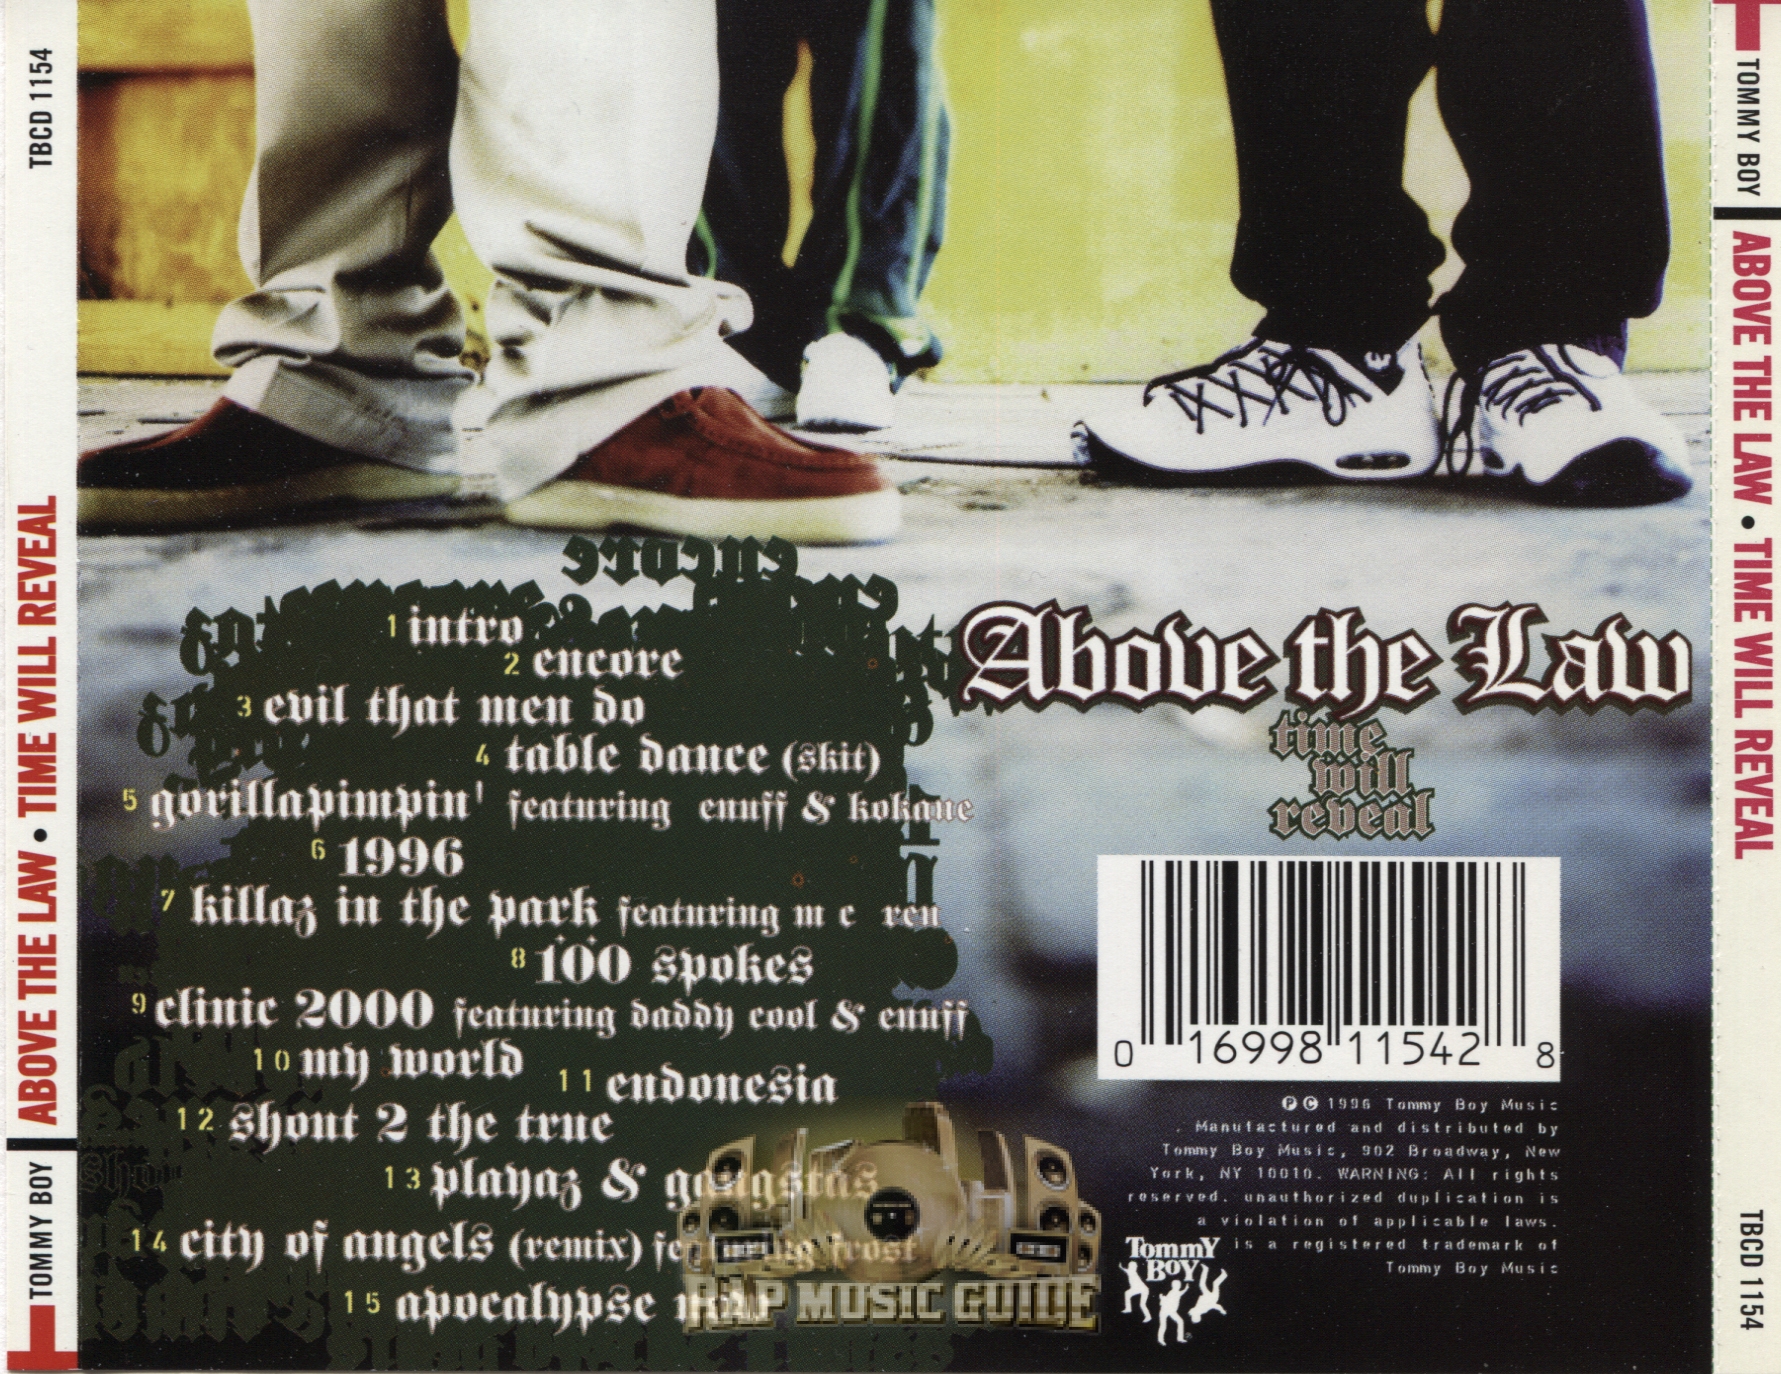 Above The Law - Time Will Reveal: CD | Rap Music Guide